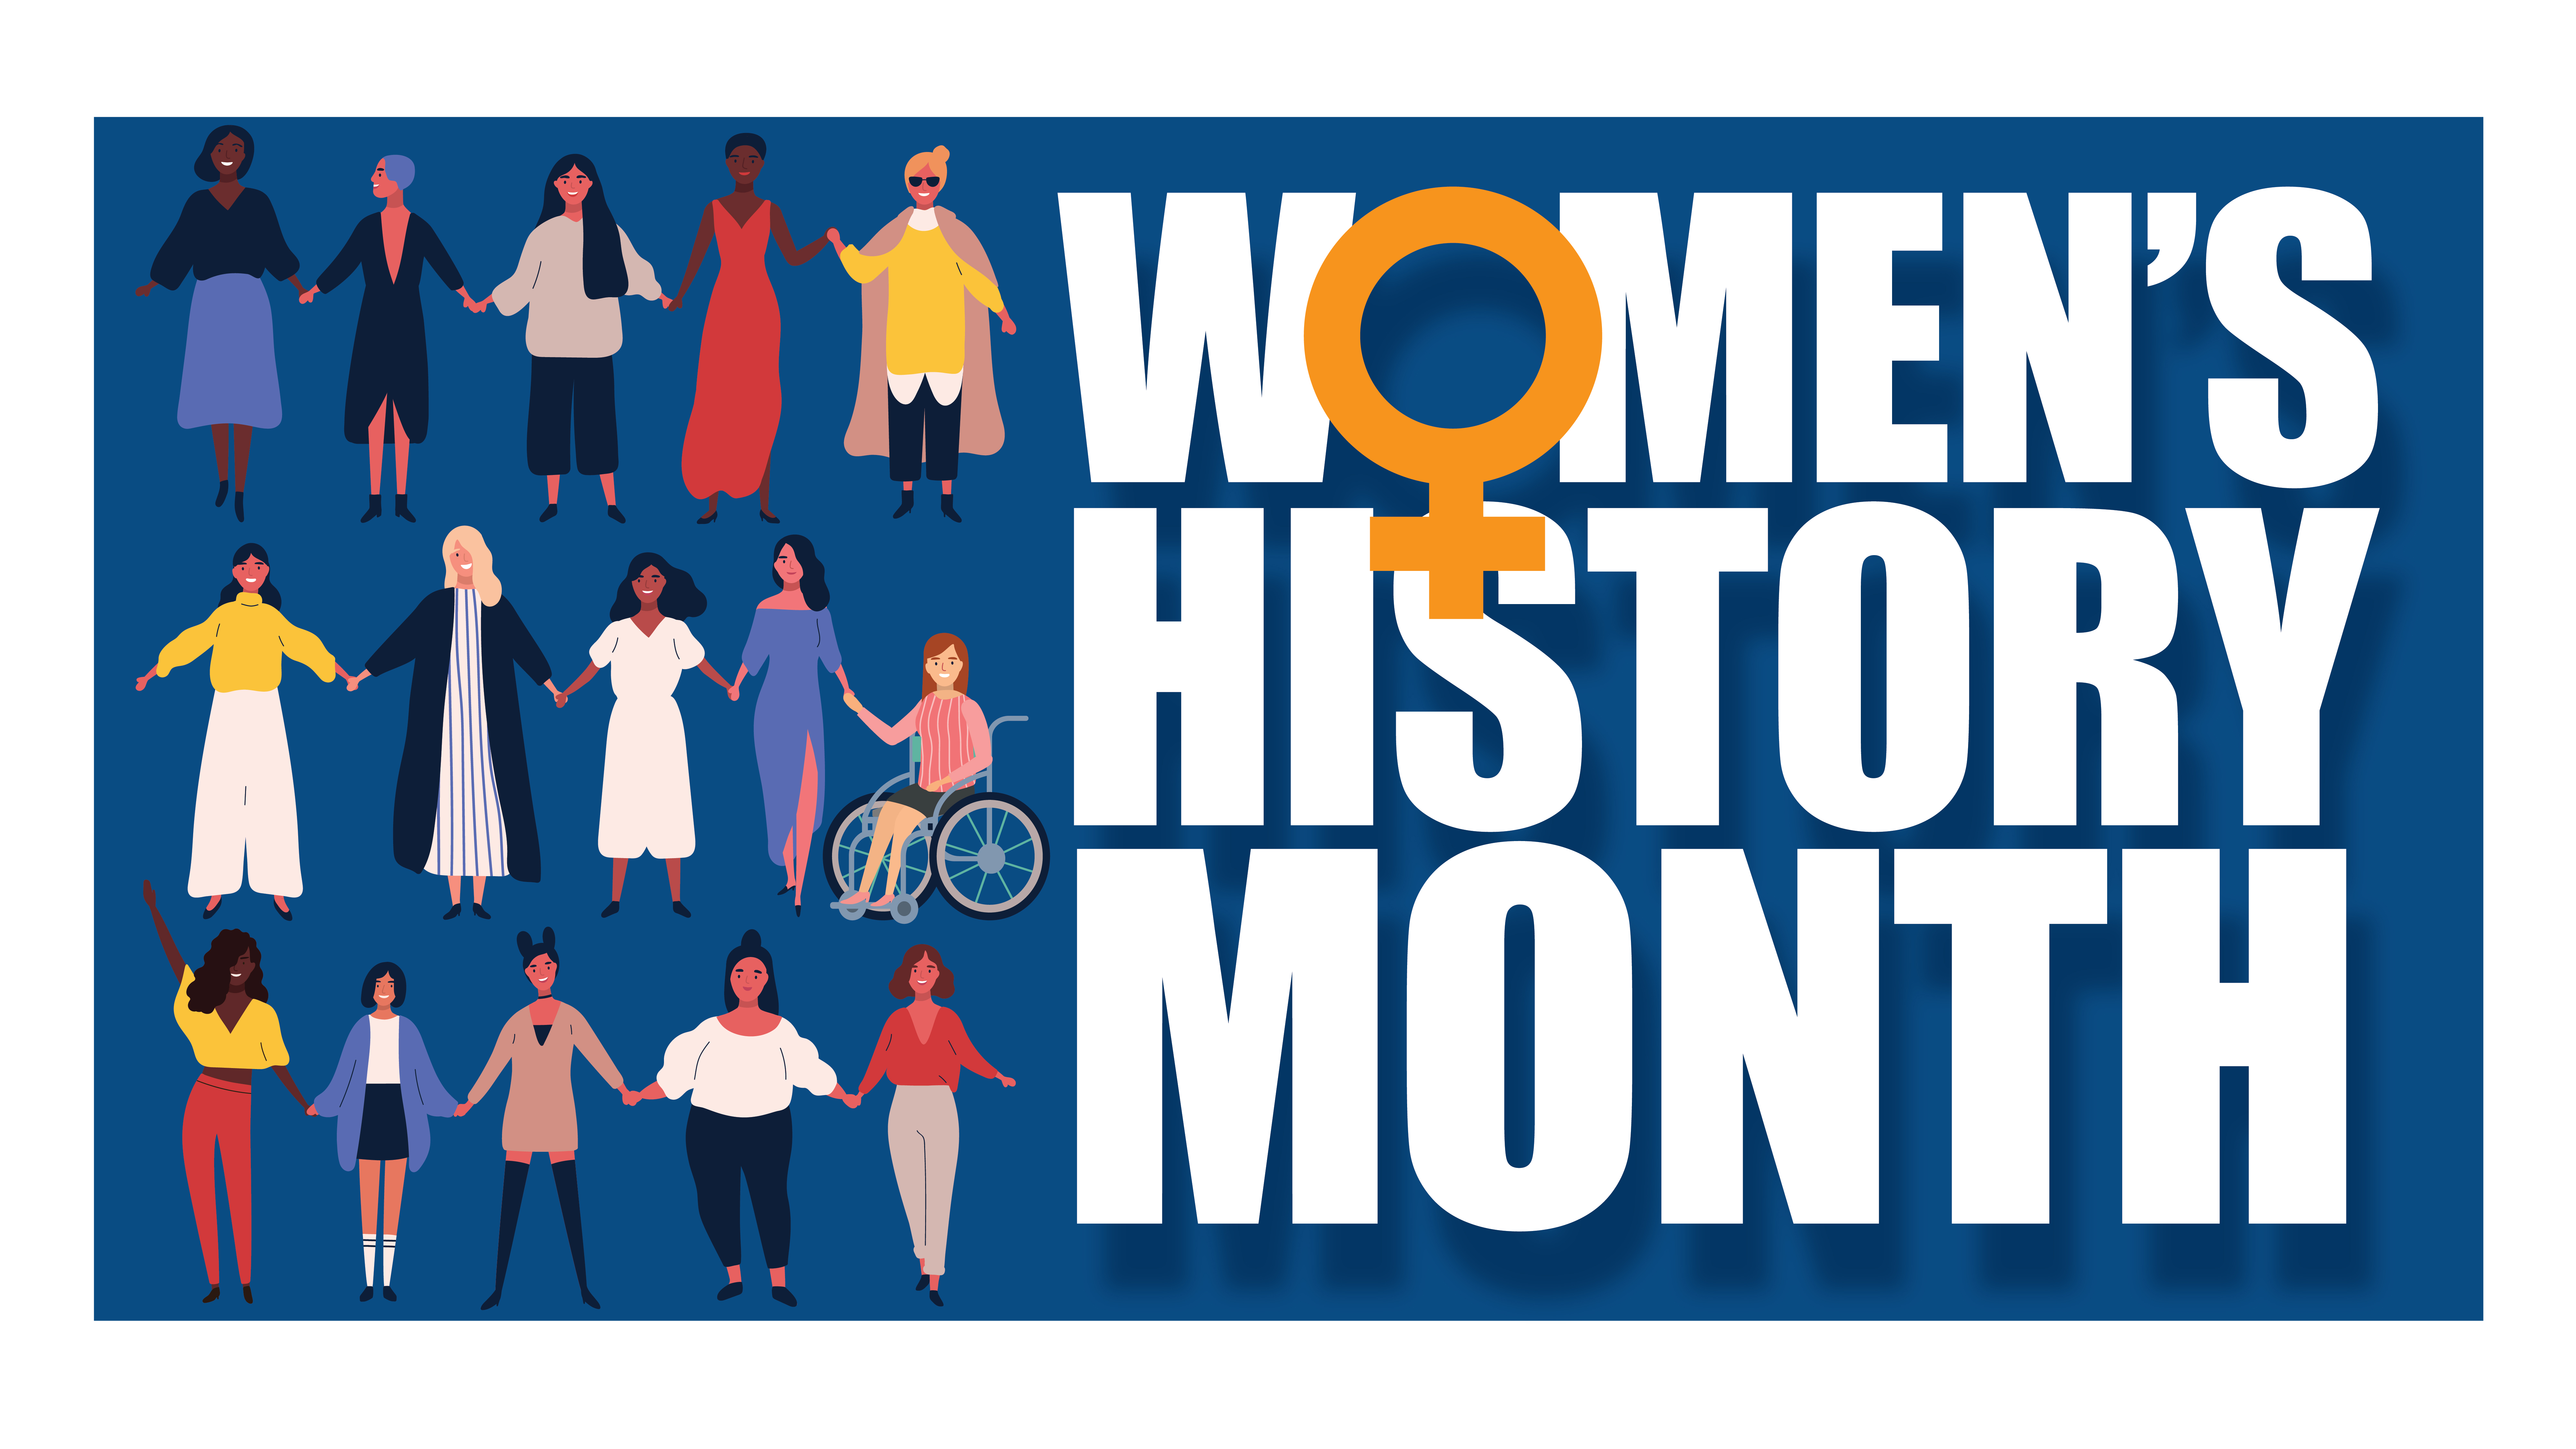 Women's History Month Image